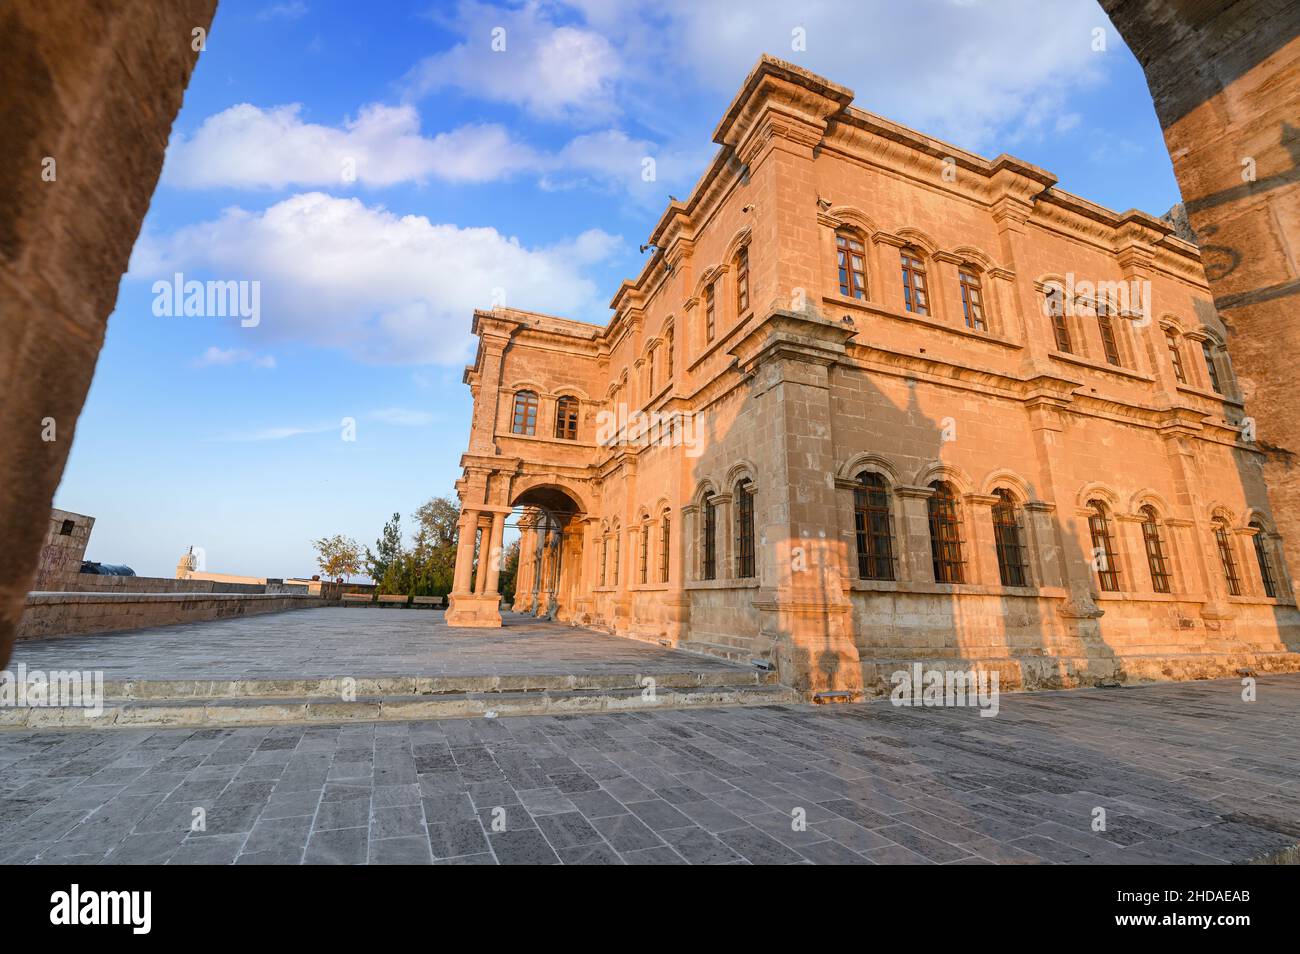 The Maturity Institute in the old town of Mardin, Turkey Stock Photo